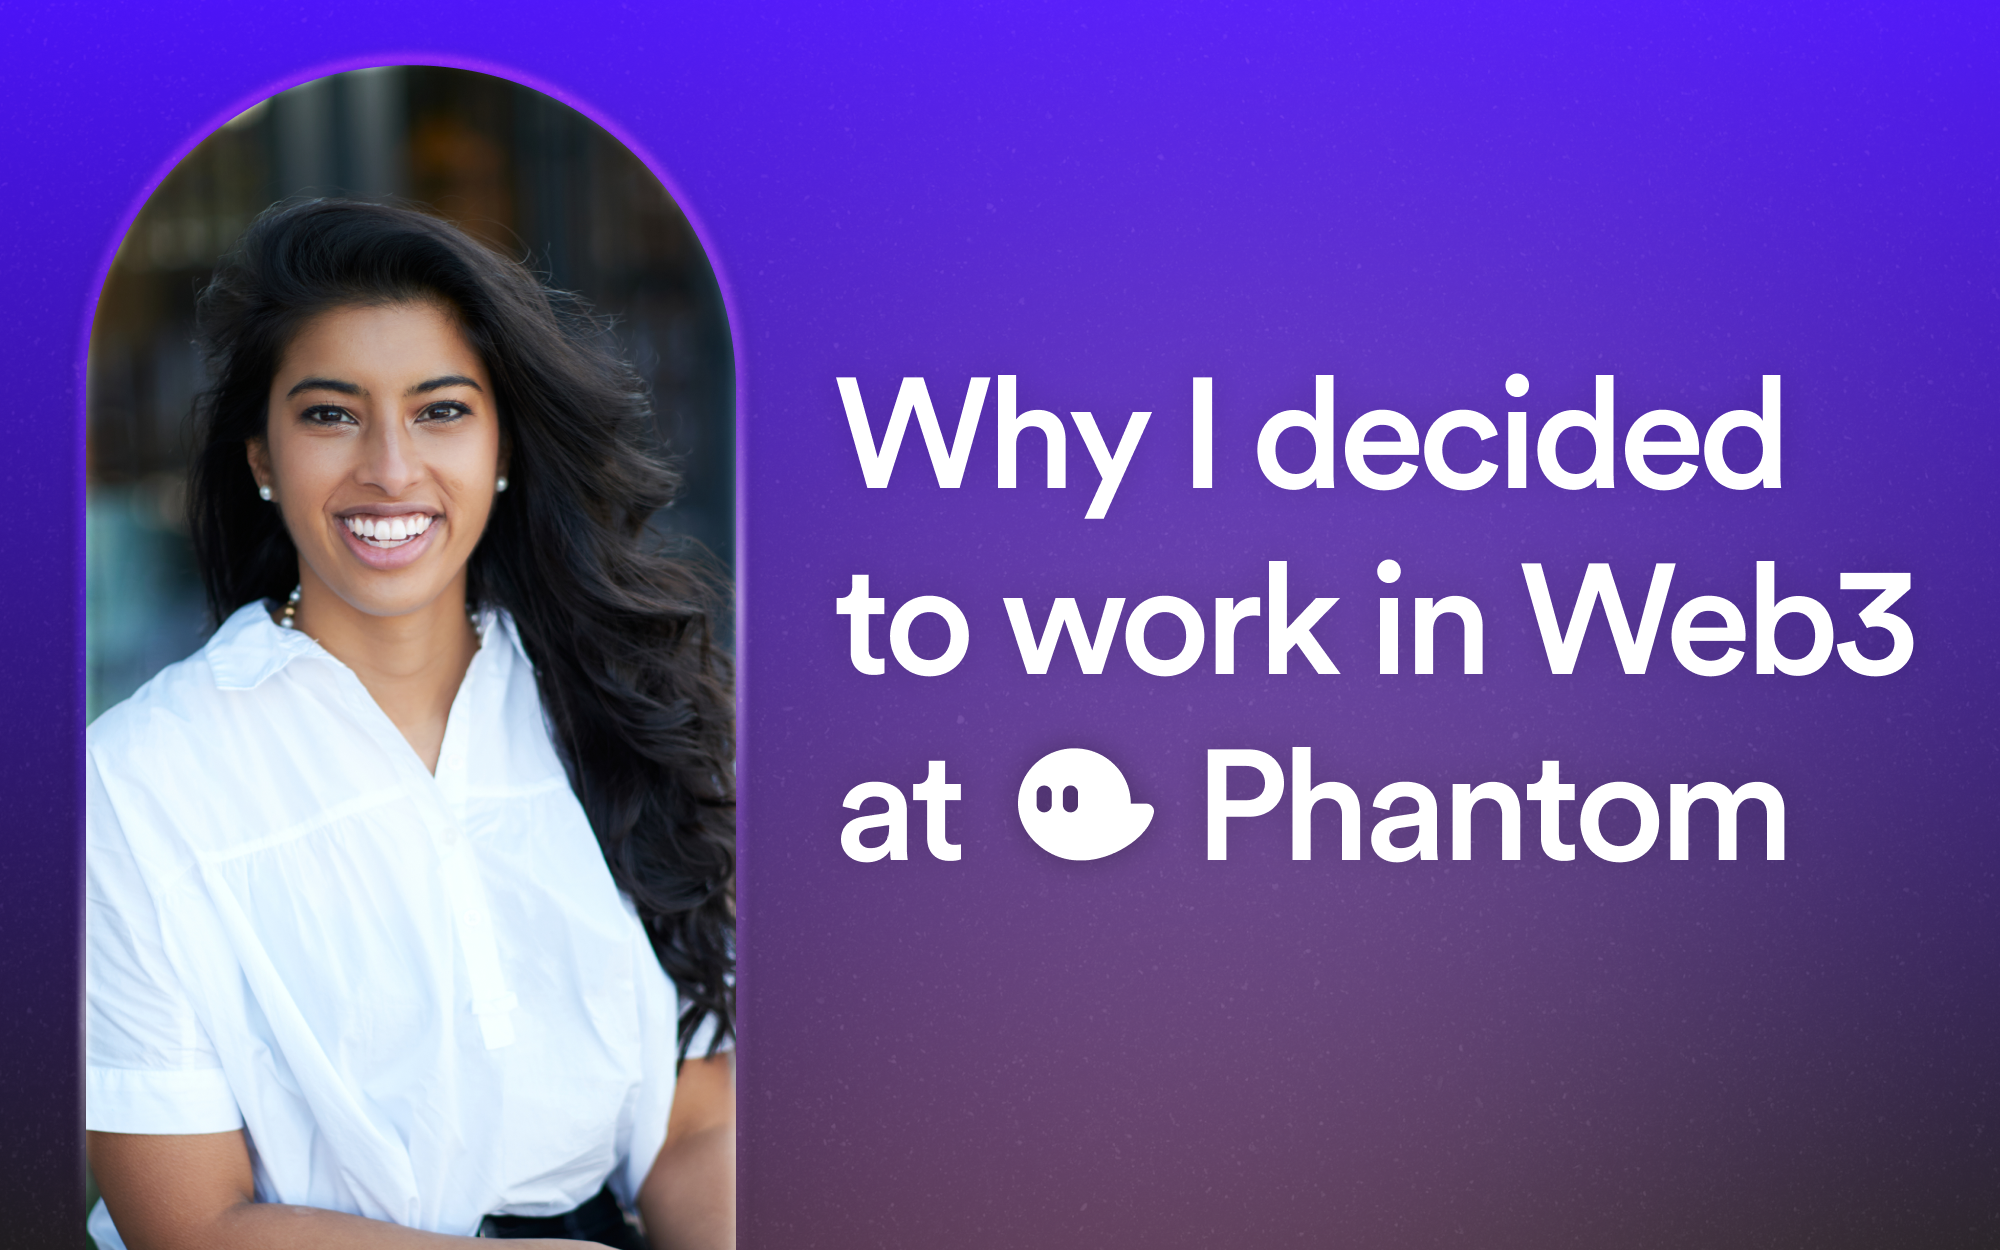 Why I decided to work in web3 at Phantom